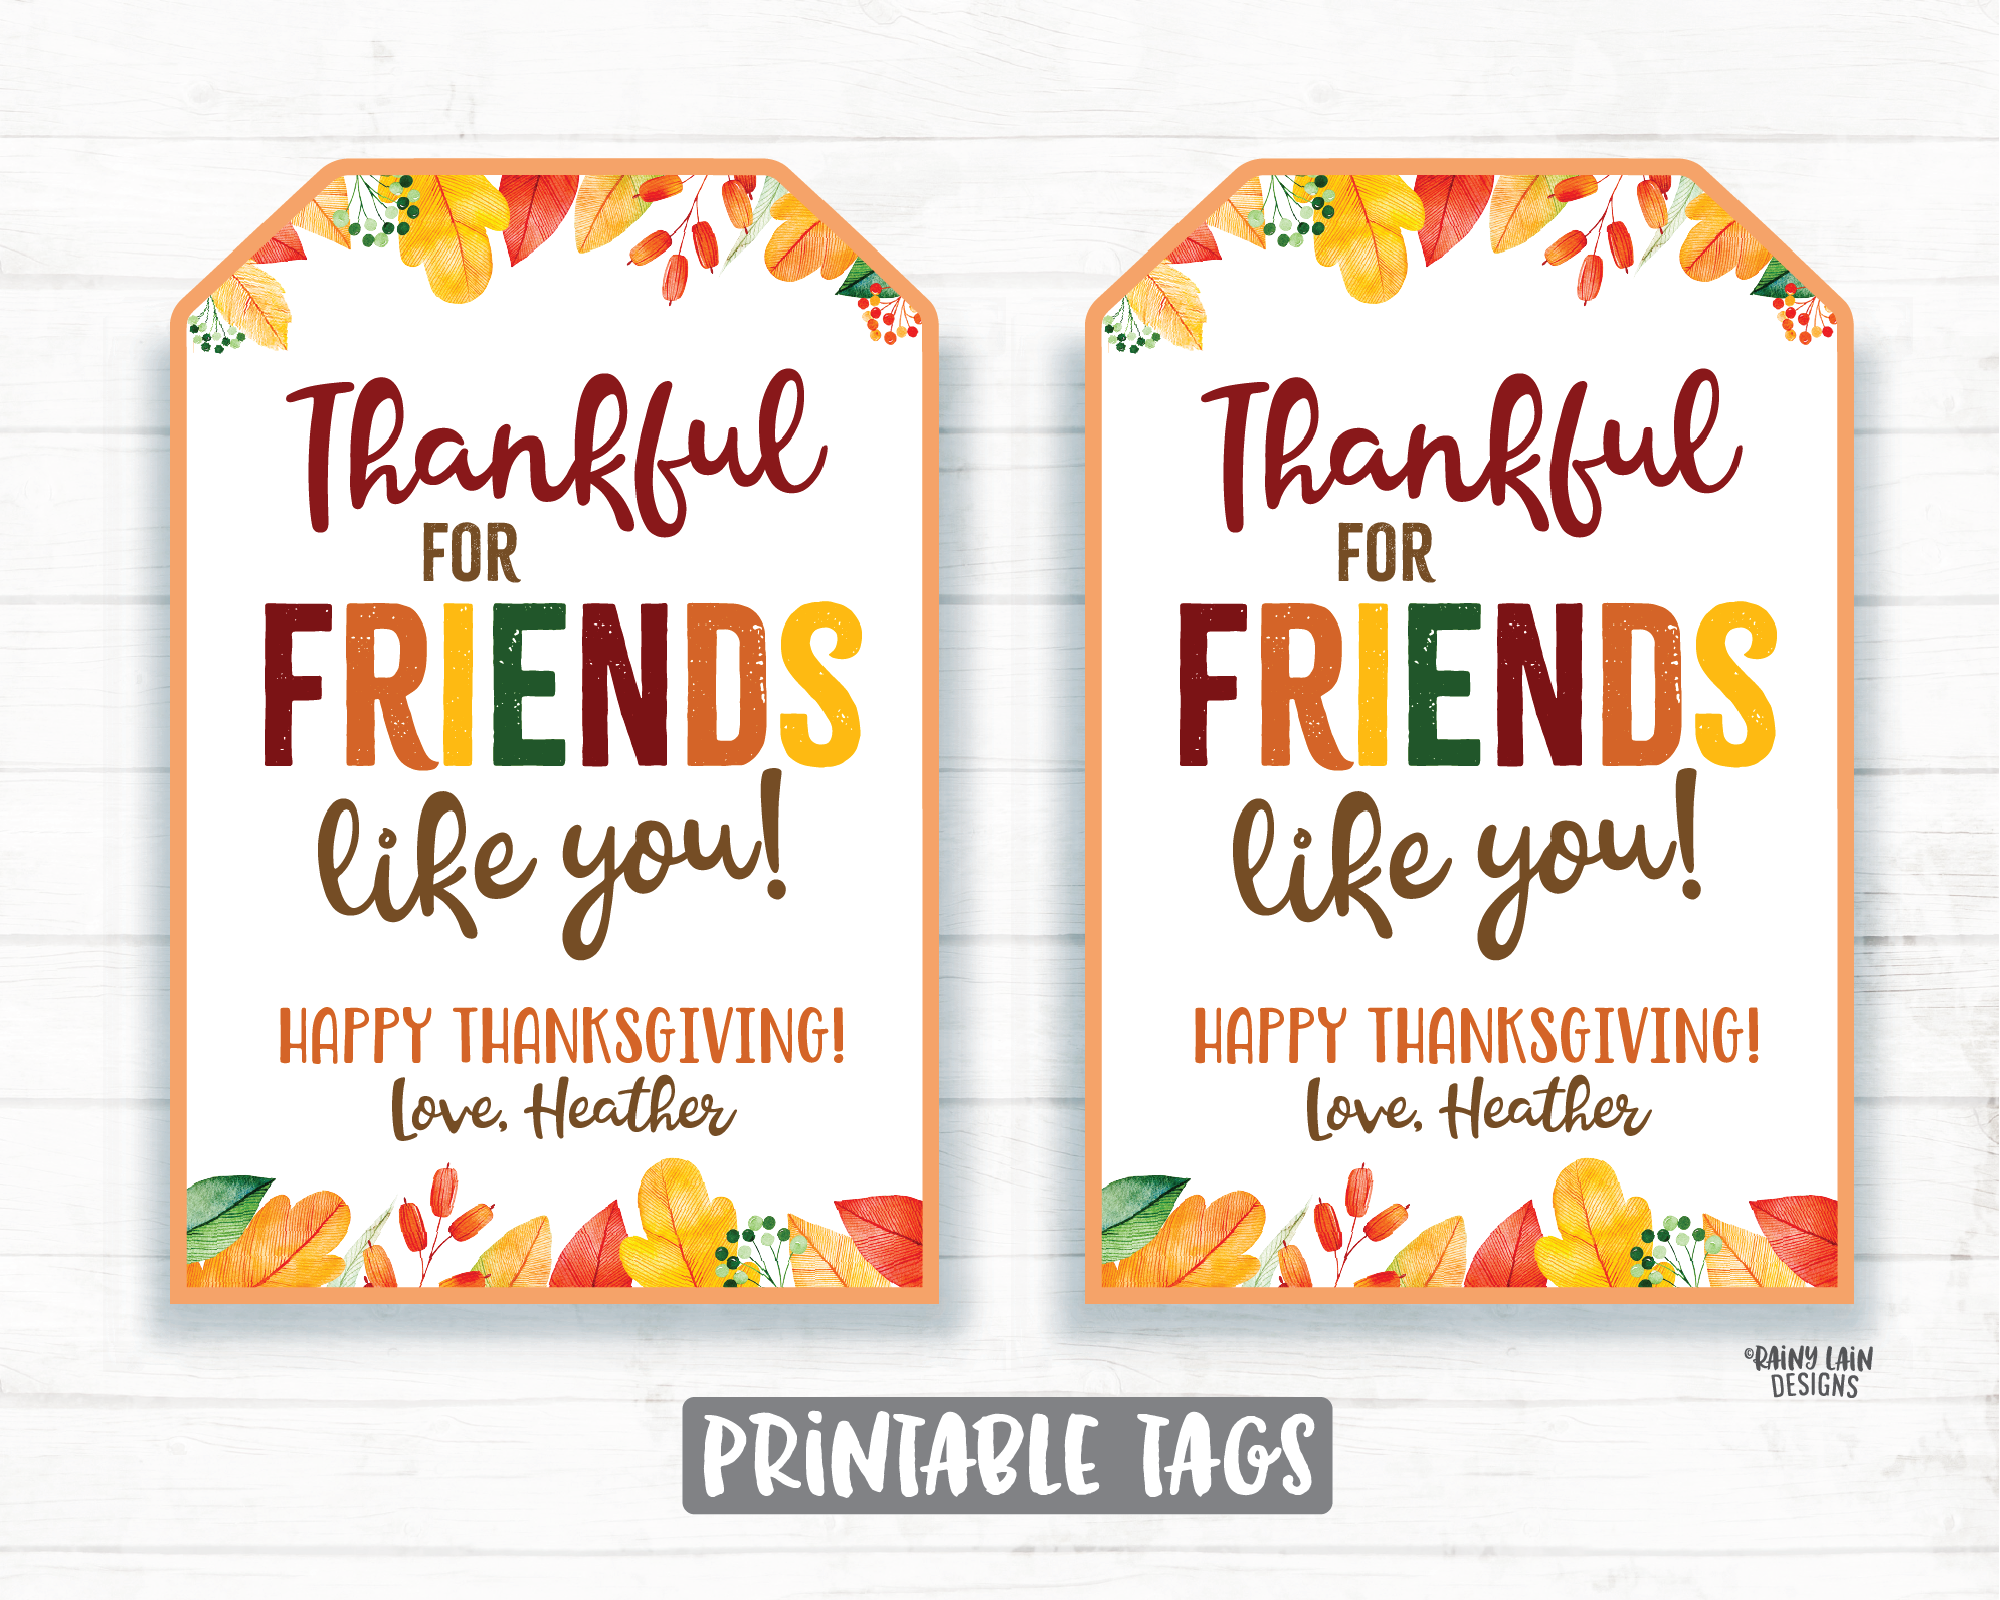 Thankful for Friends Like You Tags, Thankful Tags, Pie Tags, Thanksgiving Gift Tag Friendsgiving Co-Worker Hostess Friend thanksgiving gift